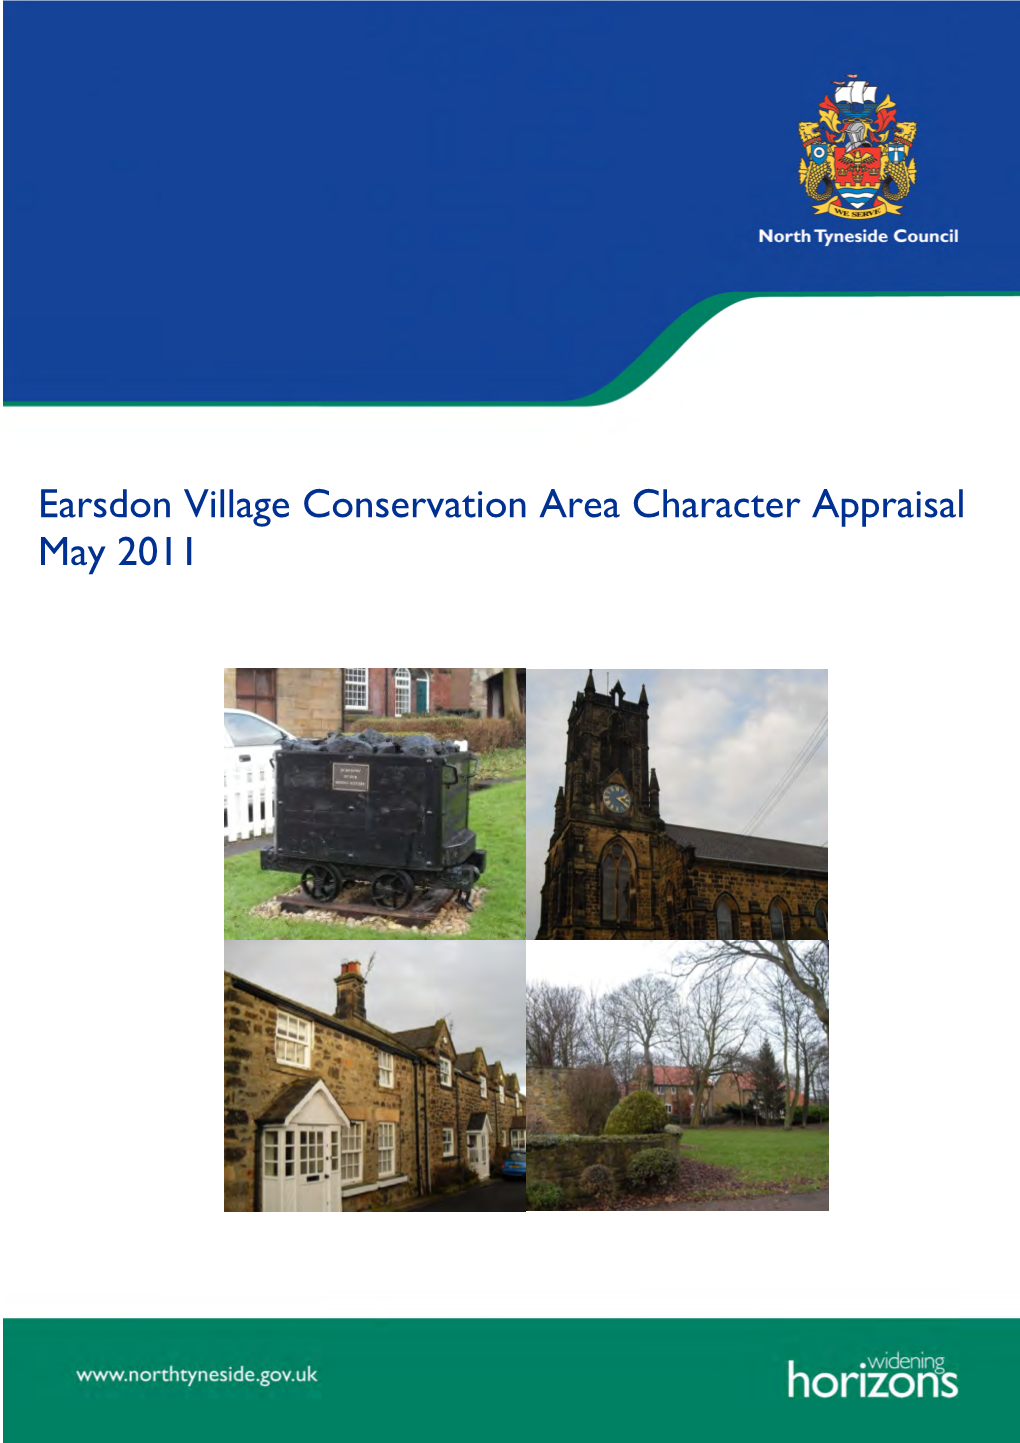 Earsdon Village Conservation Area Character Appraisal May 2011